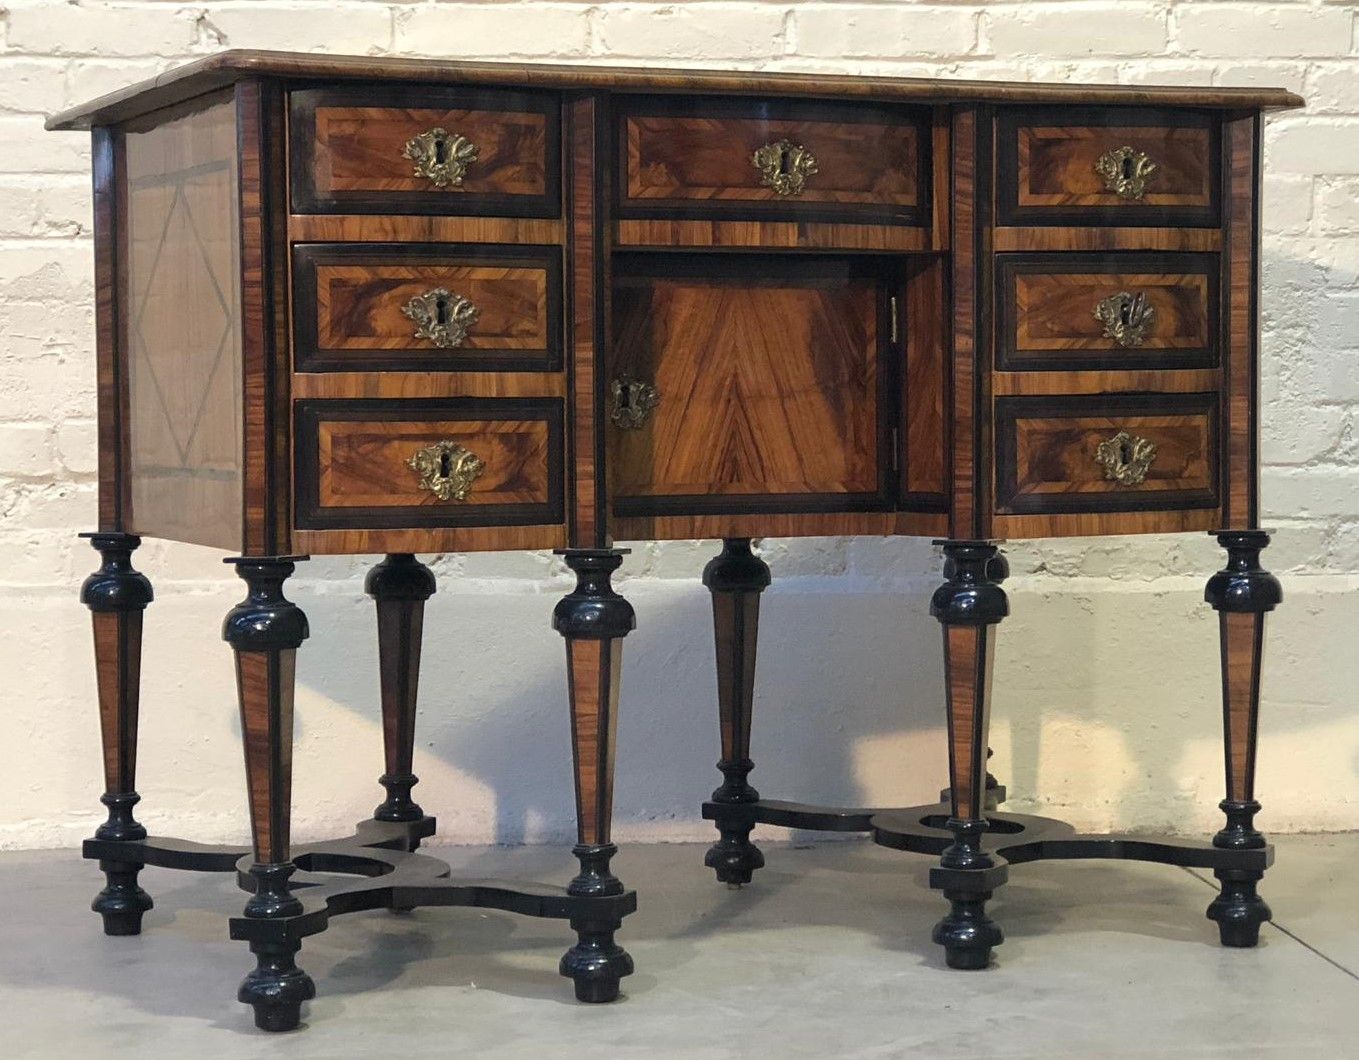 Null MAZARIN GRENOBLE DESK

In native olive wood and blackened wood decorated wi&hellip;